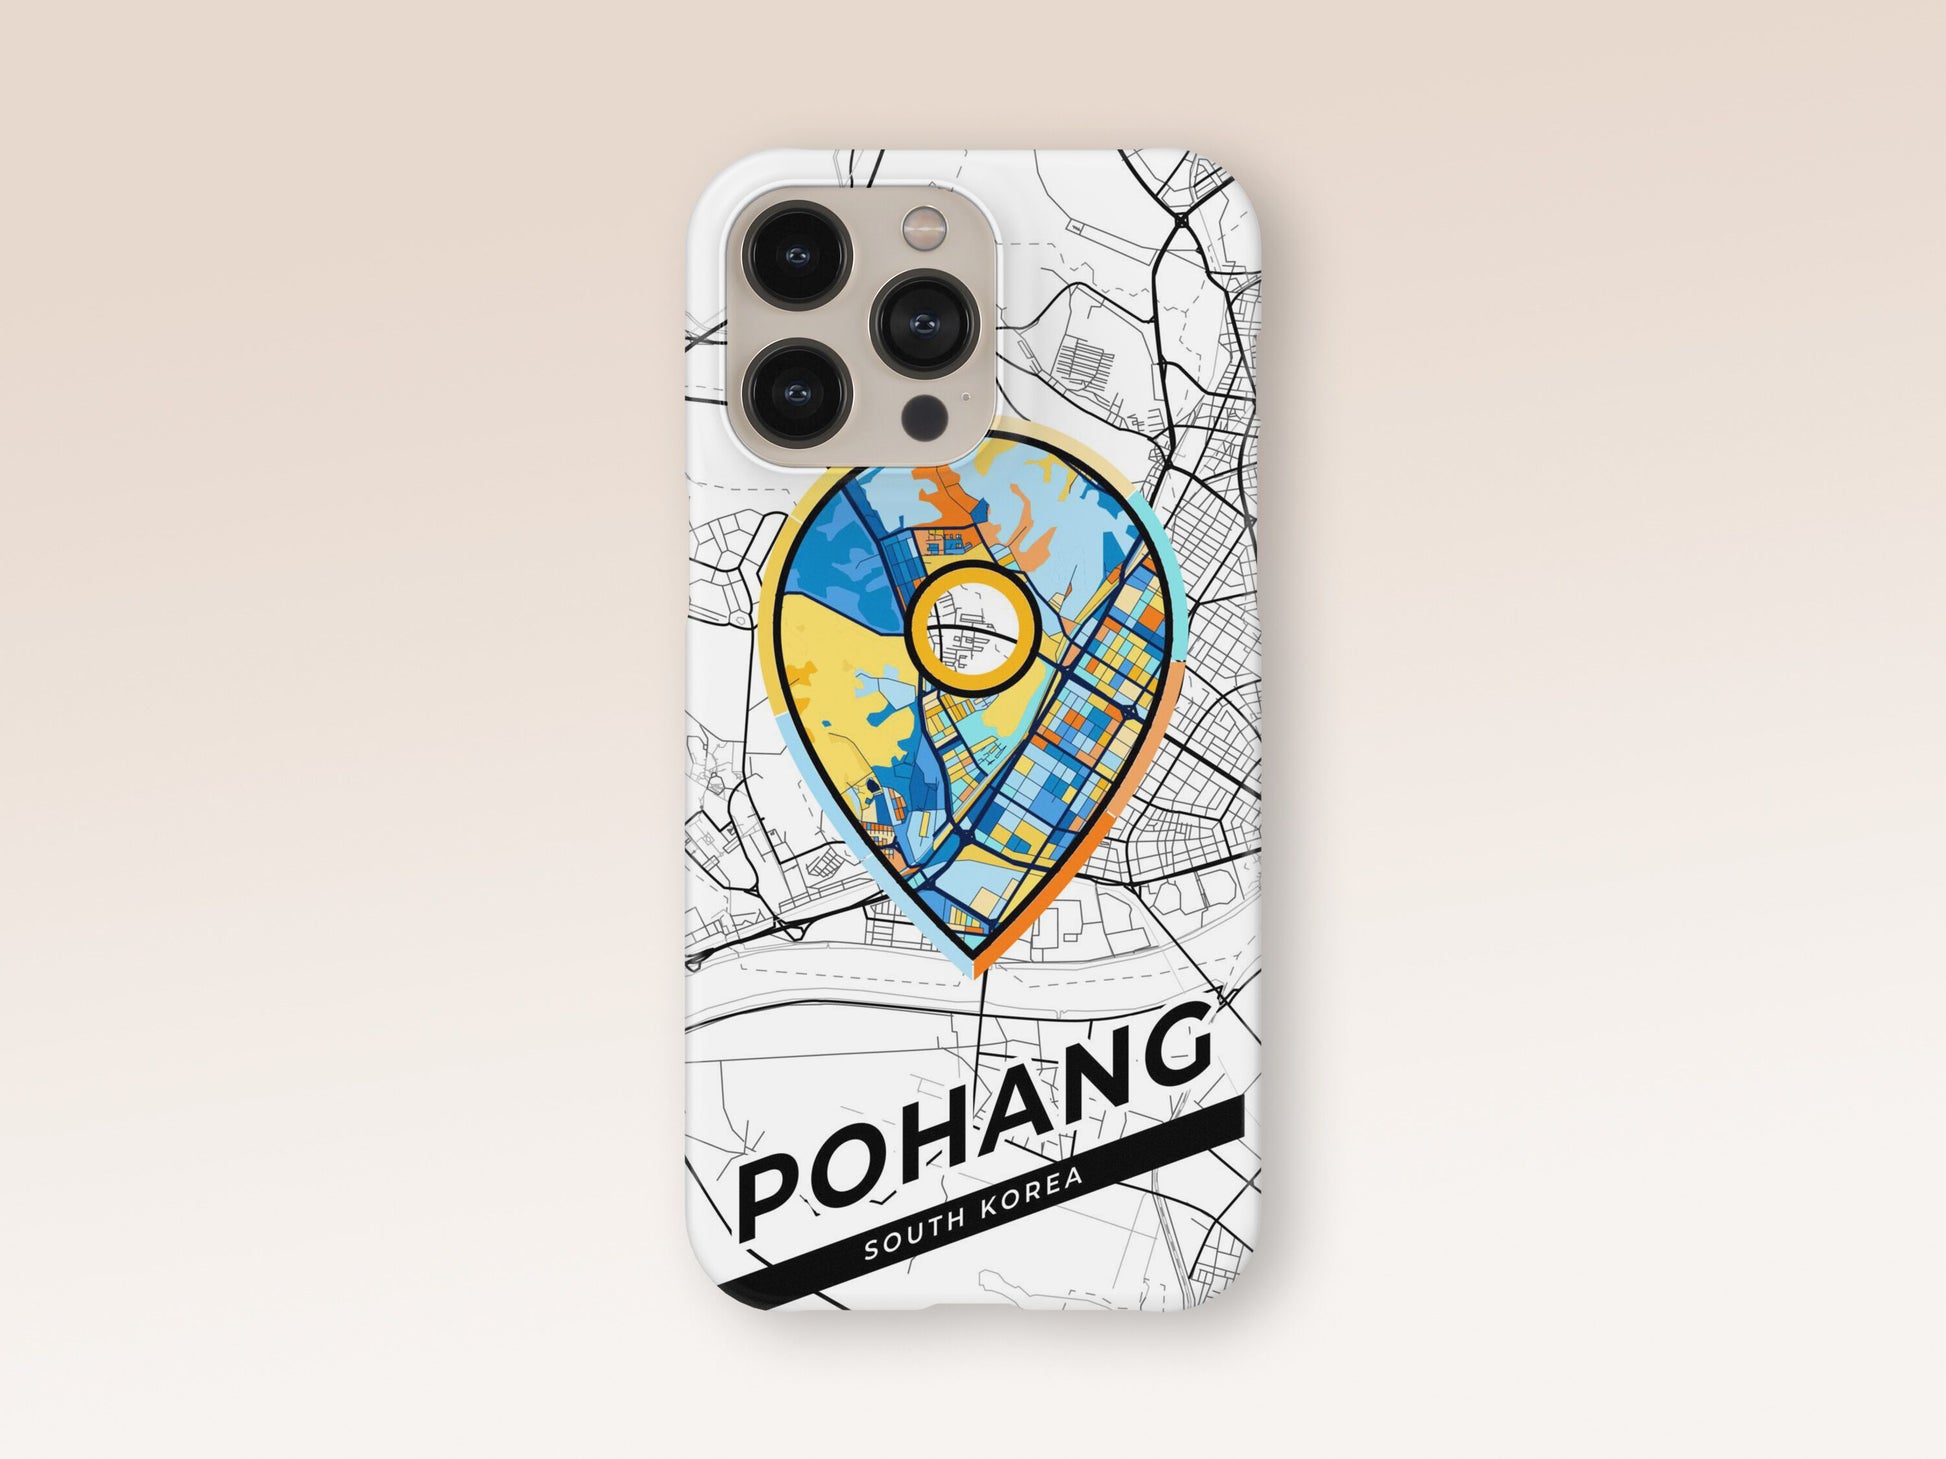 Pohang South Korea slim phone case with colorful icon. Birthday, wedding or housewarming gift. Couple match cases. 1